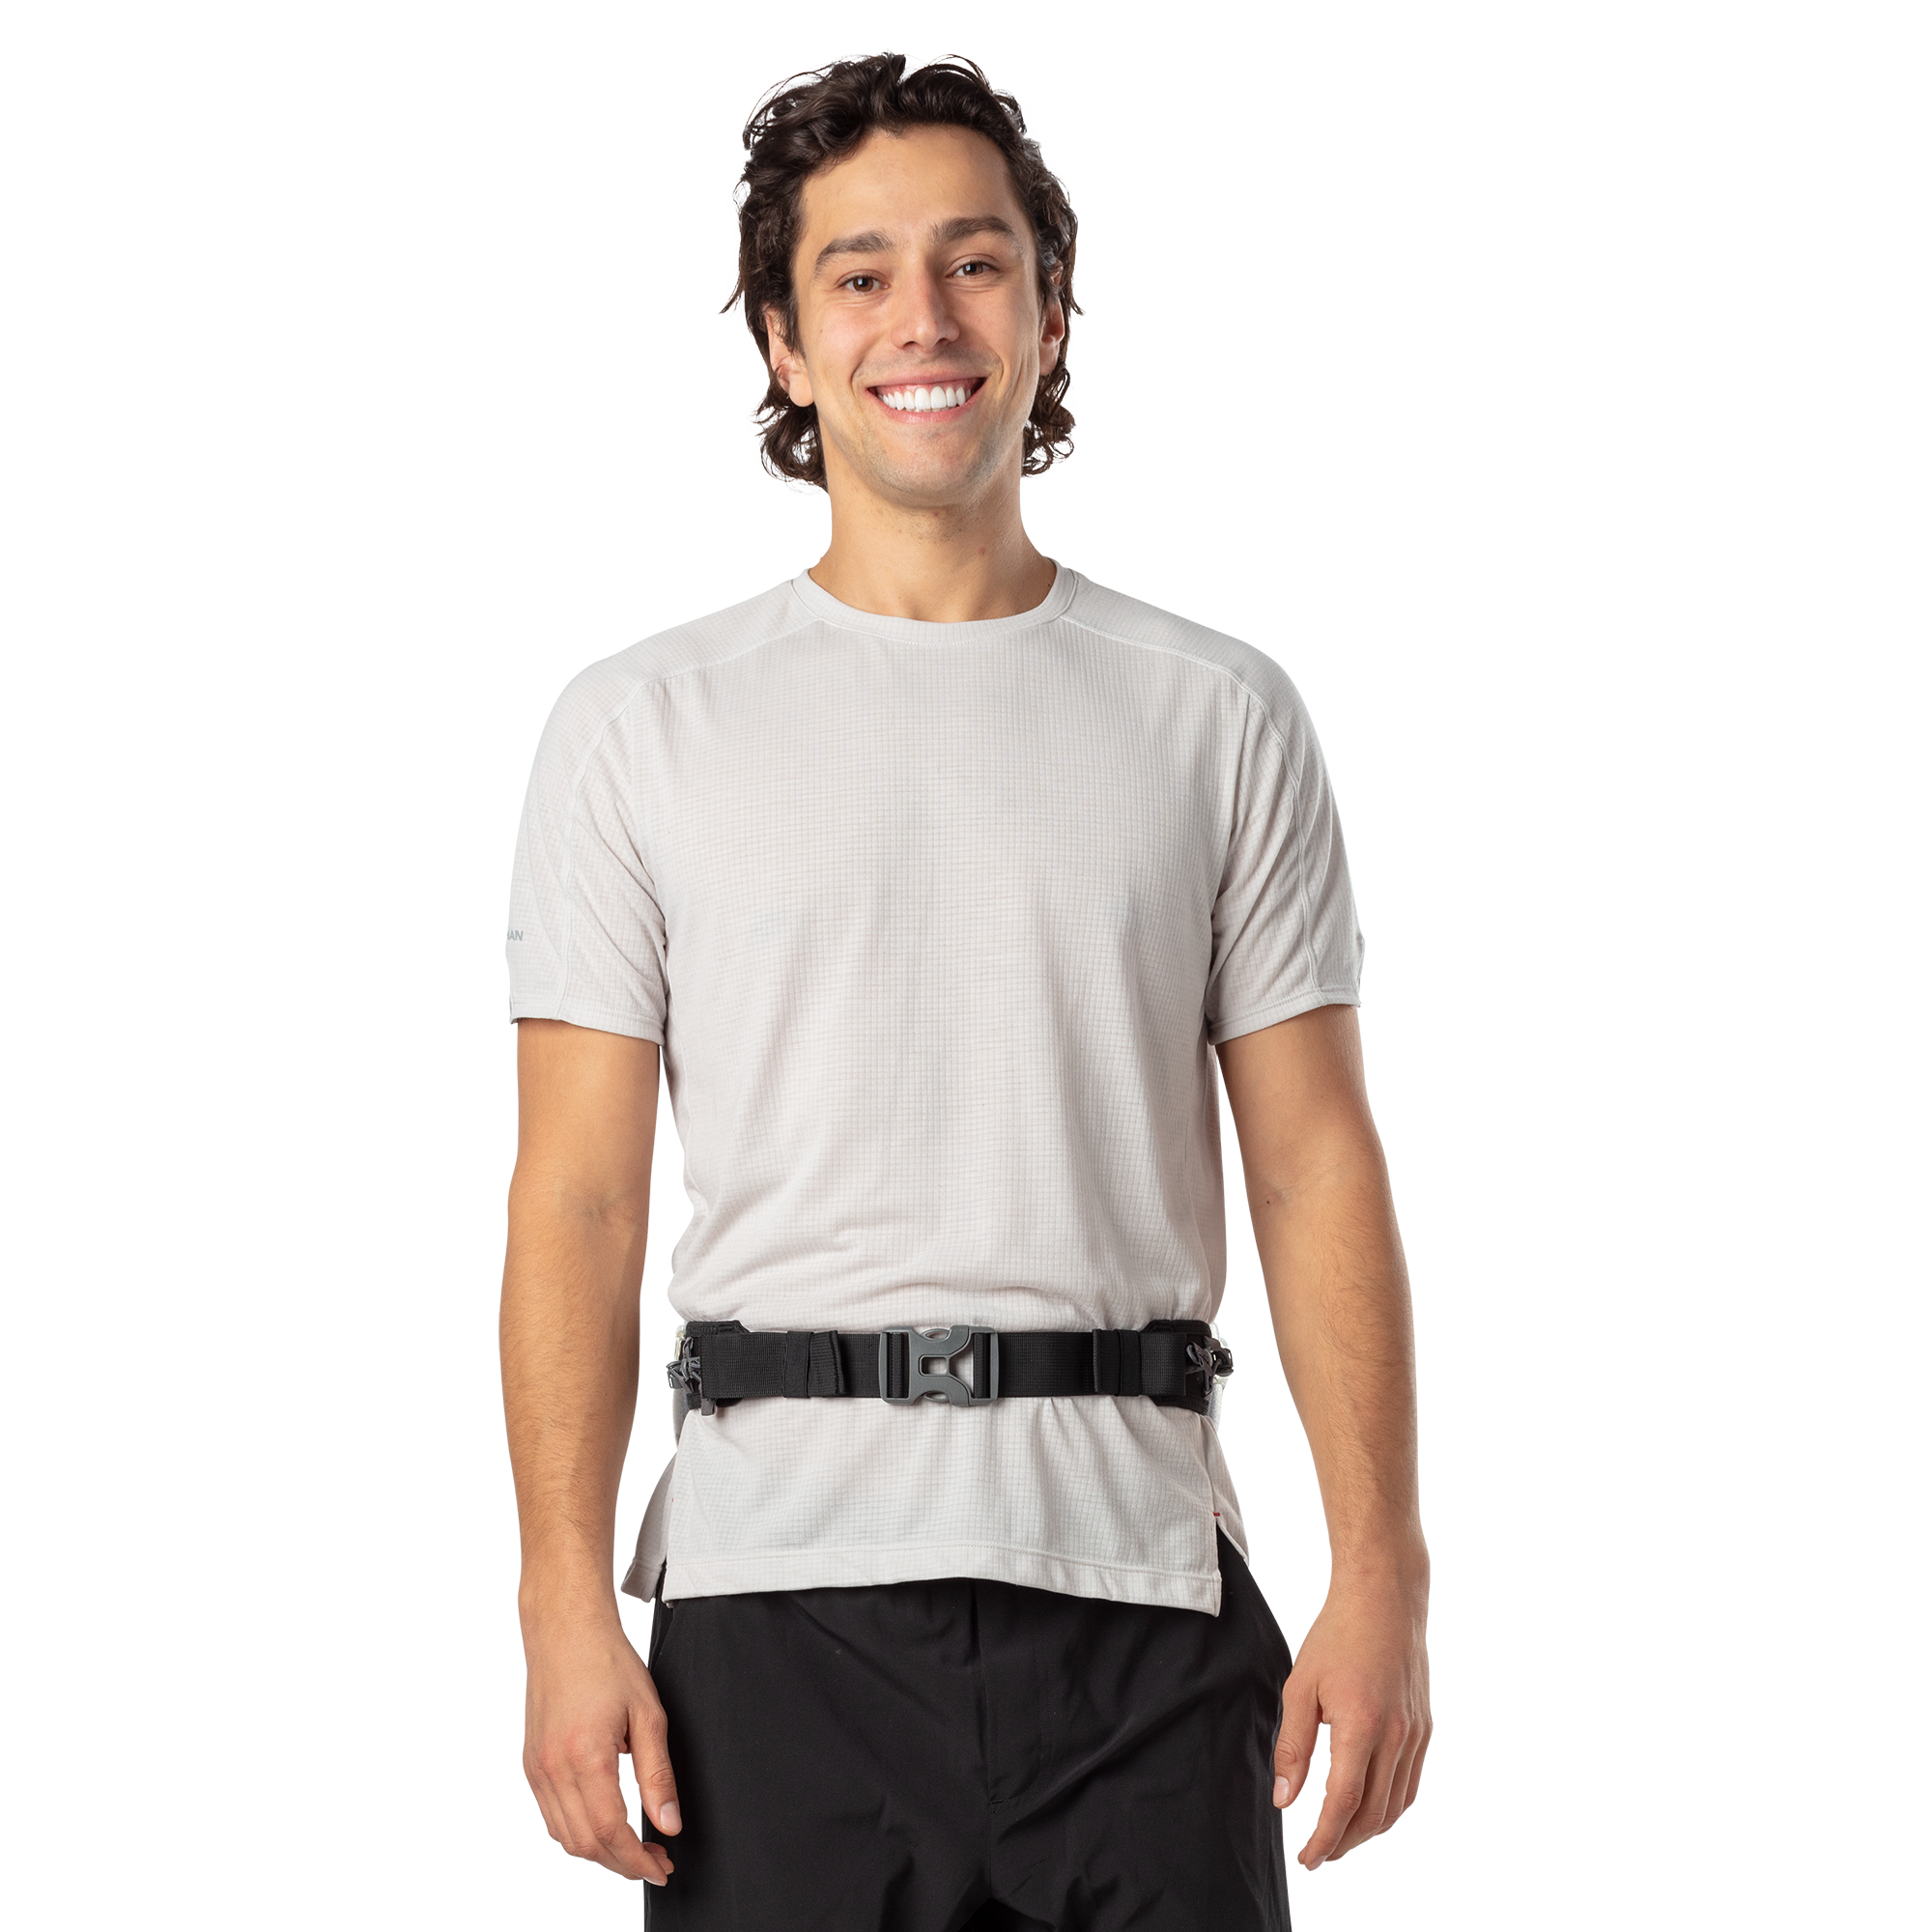 Nathan Trail Mix Plus Insulated 2 Hydration Belt